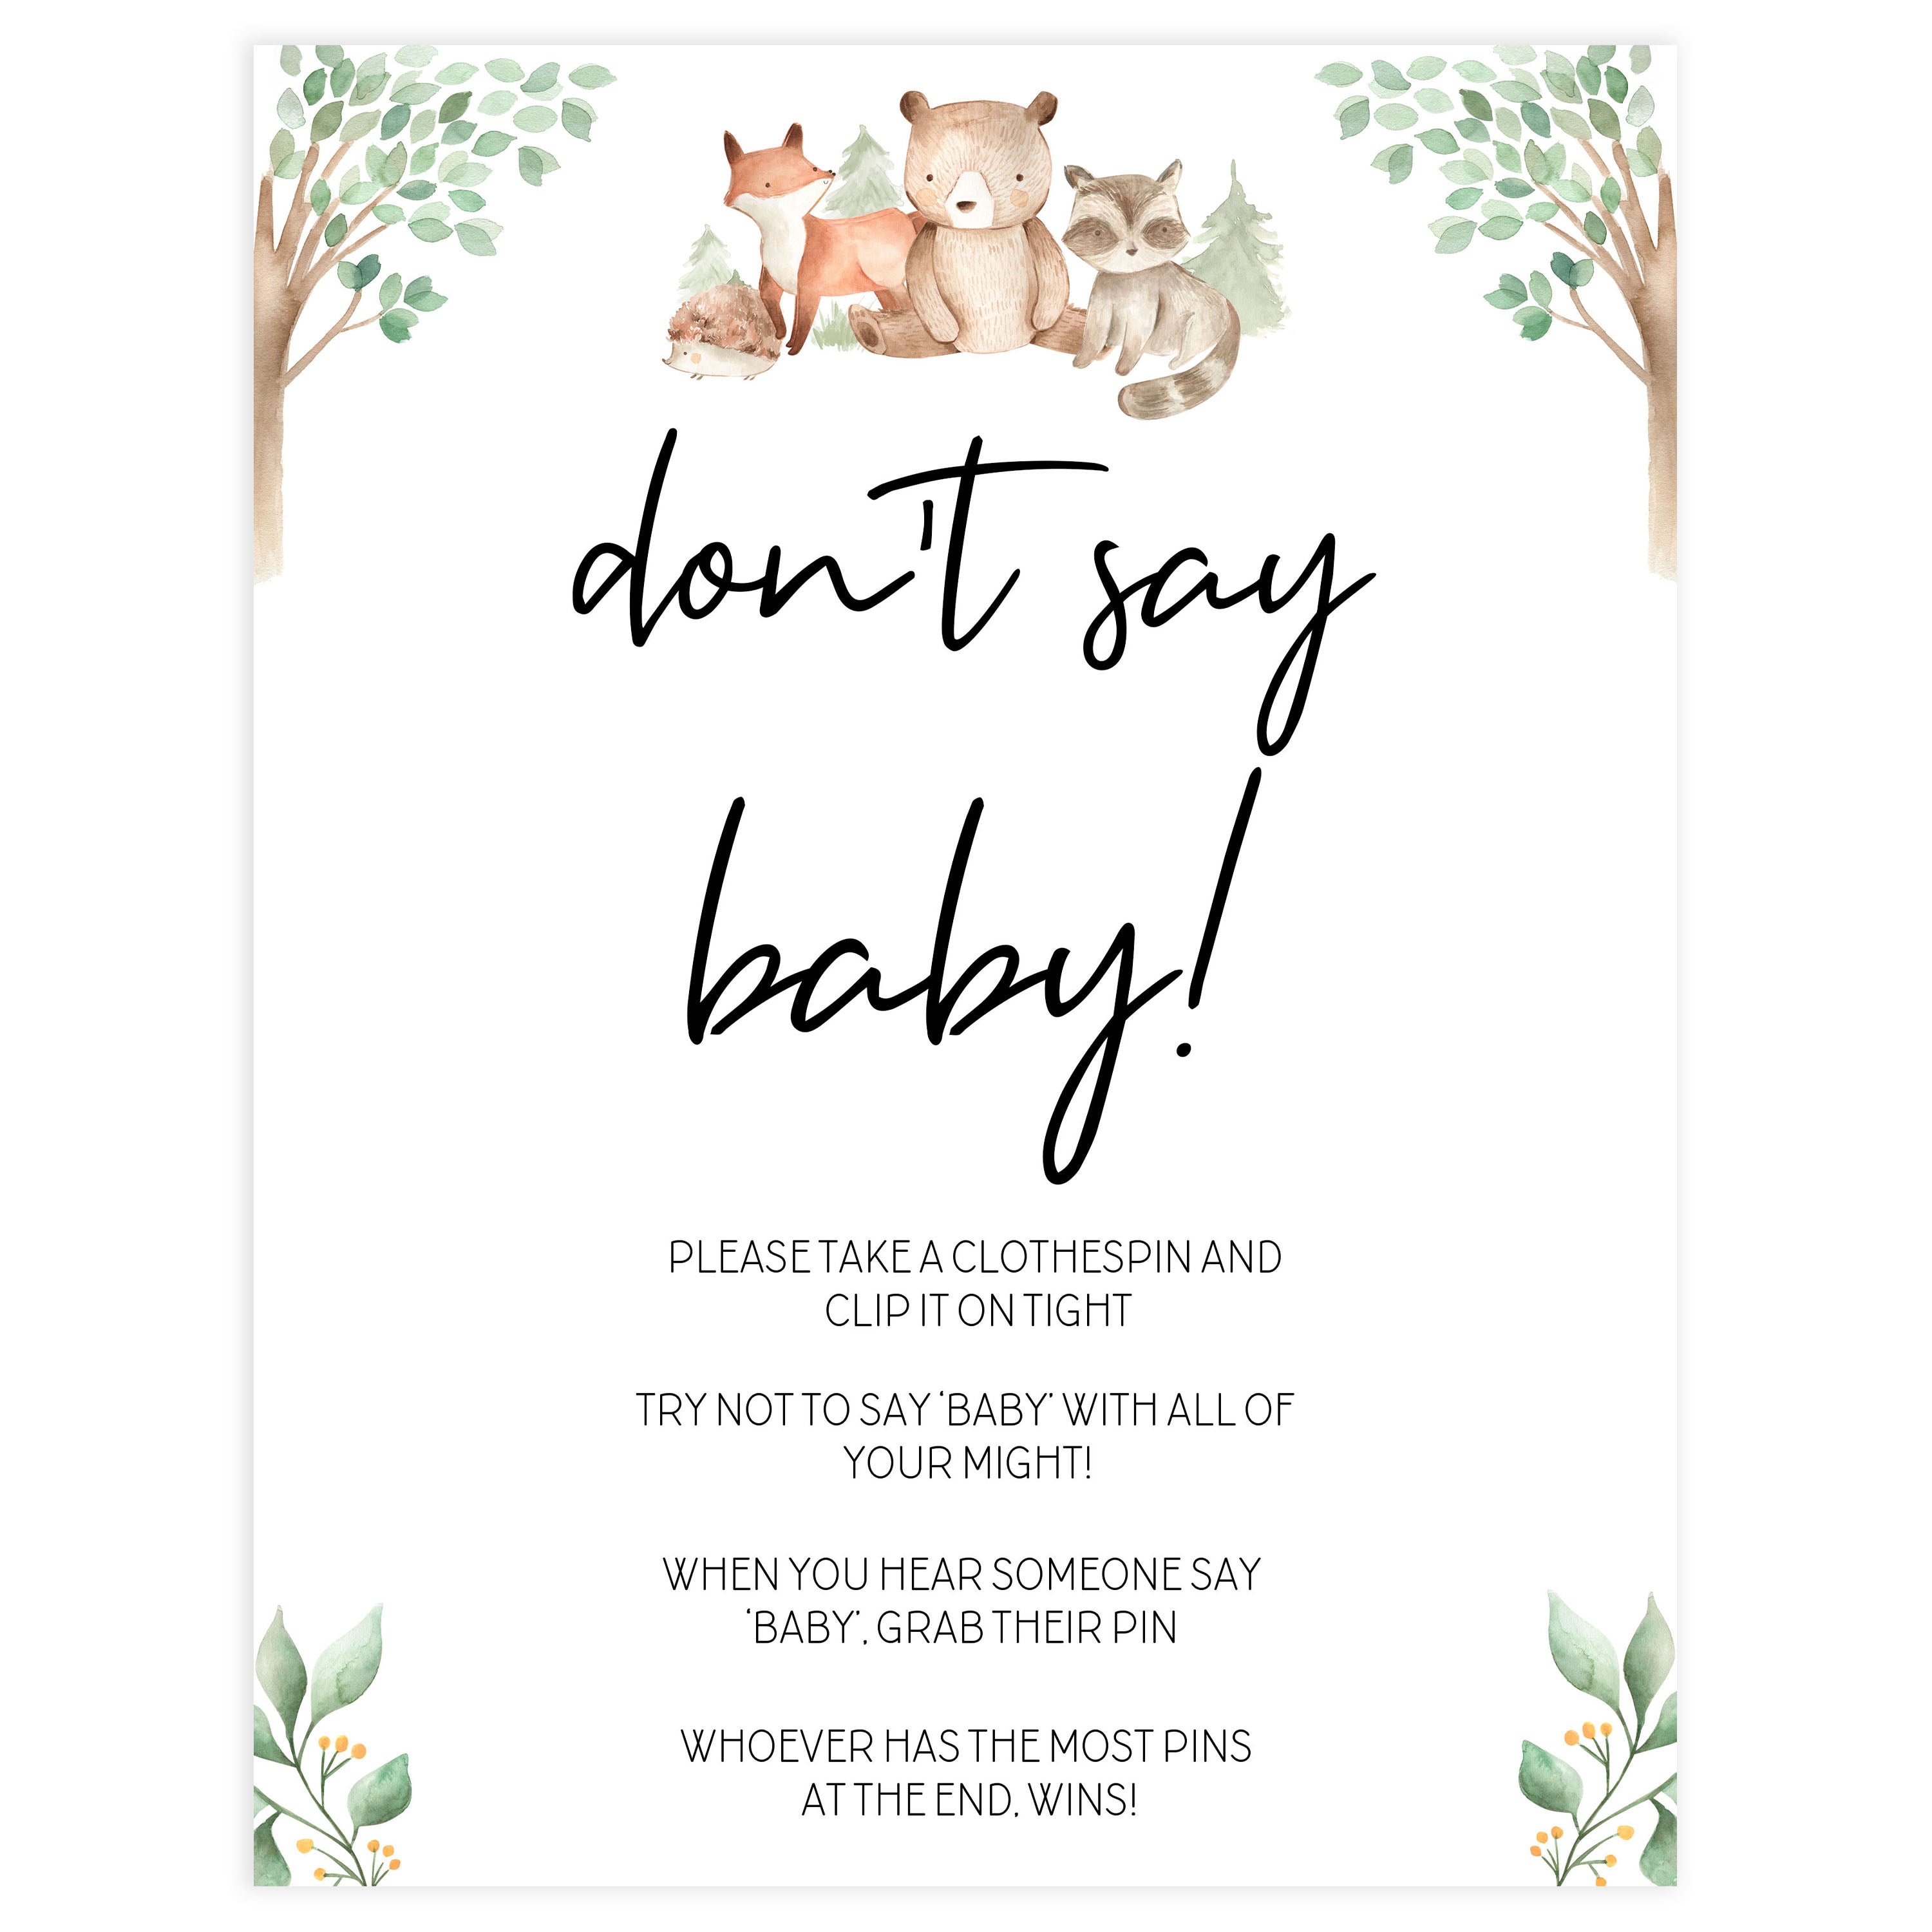 dont say baby game, Printable baby shower games, woodland animals baby games, baby shower games, fun baby shower ideas, top baby shower ideas, woodland baby shower, baby shower games, fun woodland animals baby shower ideas